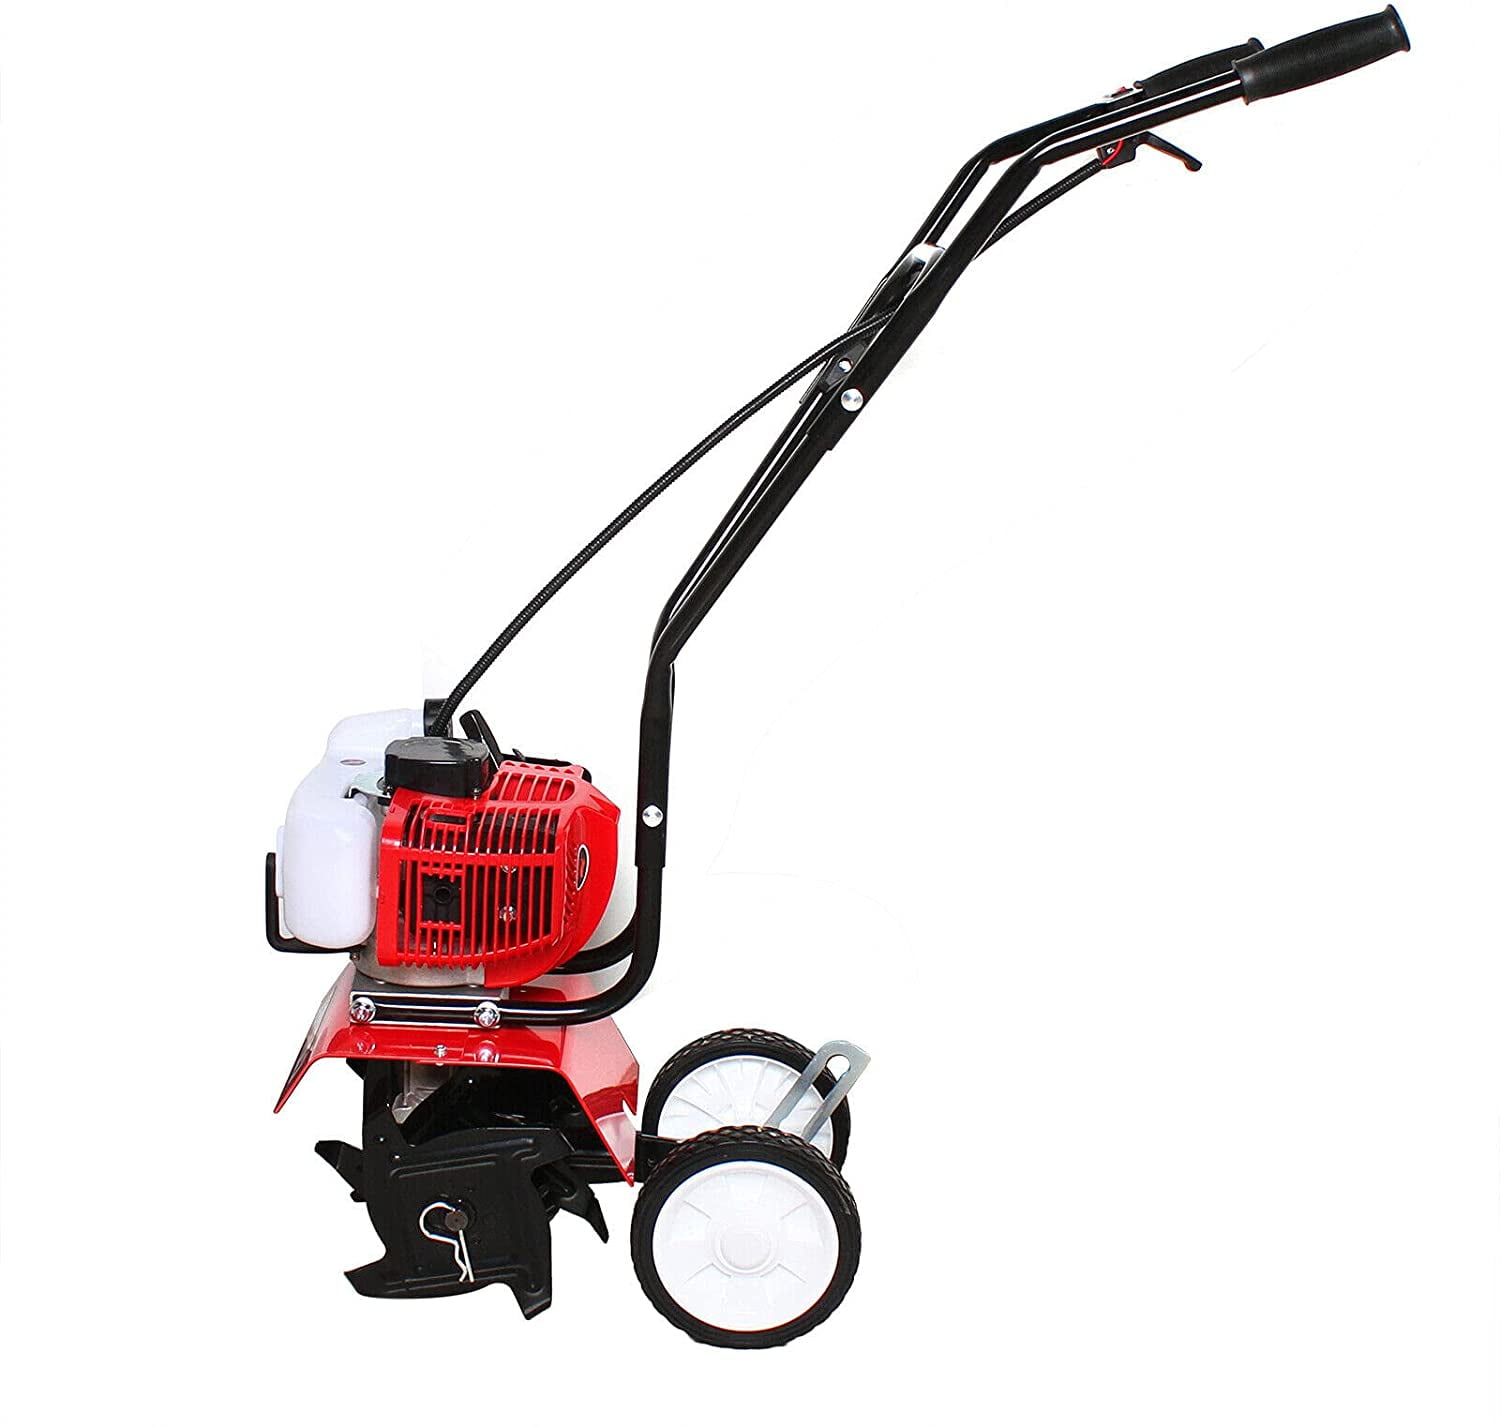 YIYIBYUS Mini Tiller Cultivator 52CC 2 Stroke 2HP Petrol Power Tiller Rototiller Lawn Machine for Garden Lawn,Digging,Soil Cultivation and Weed Removal 